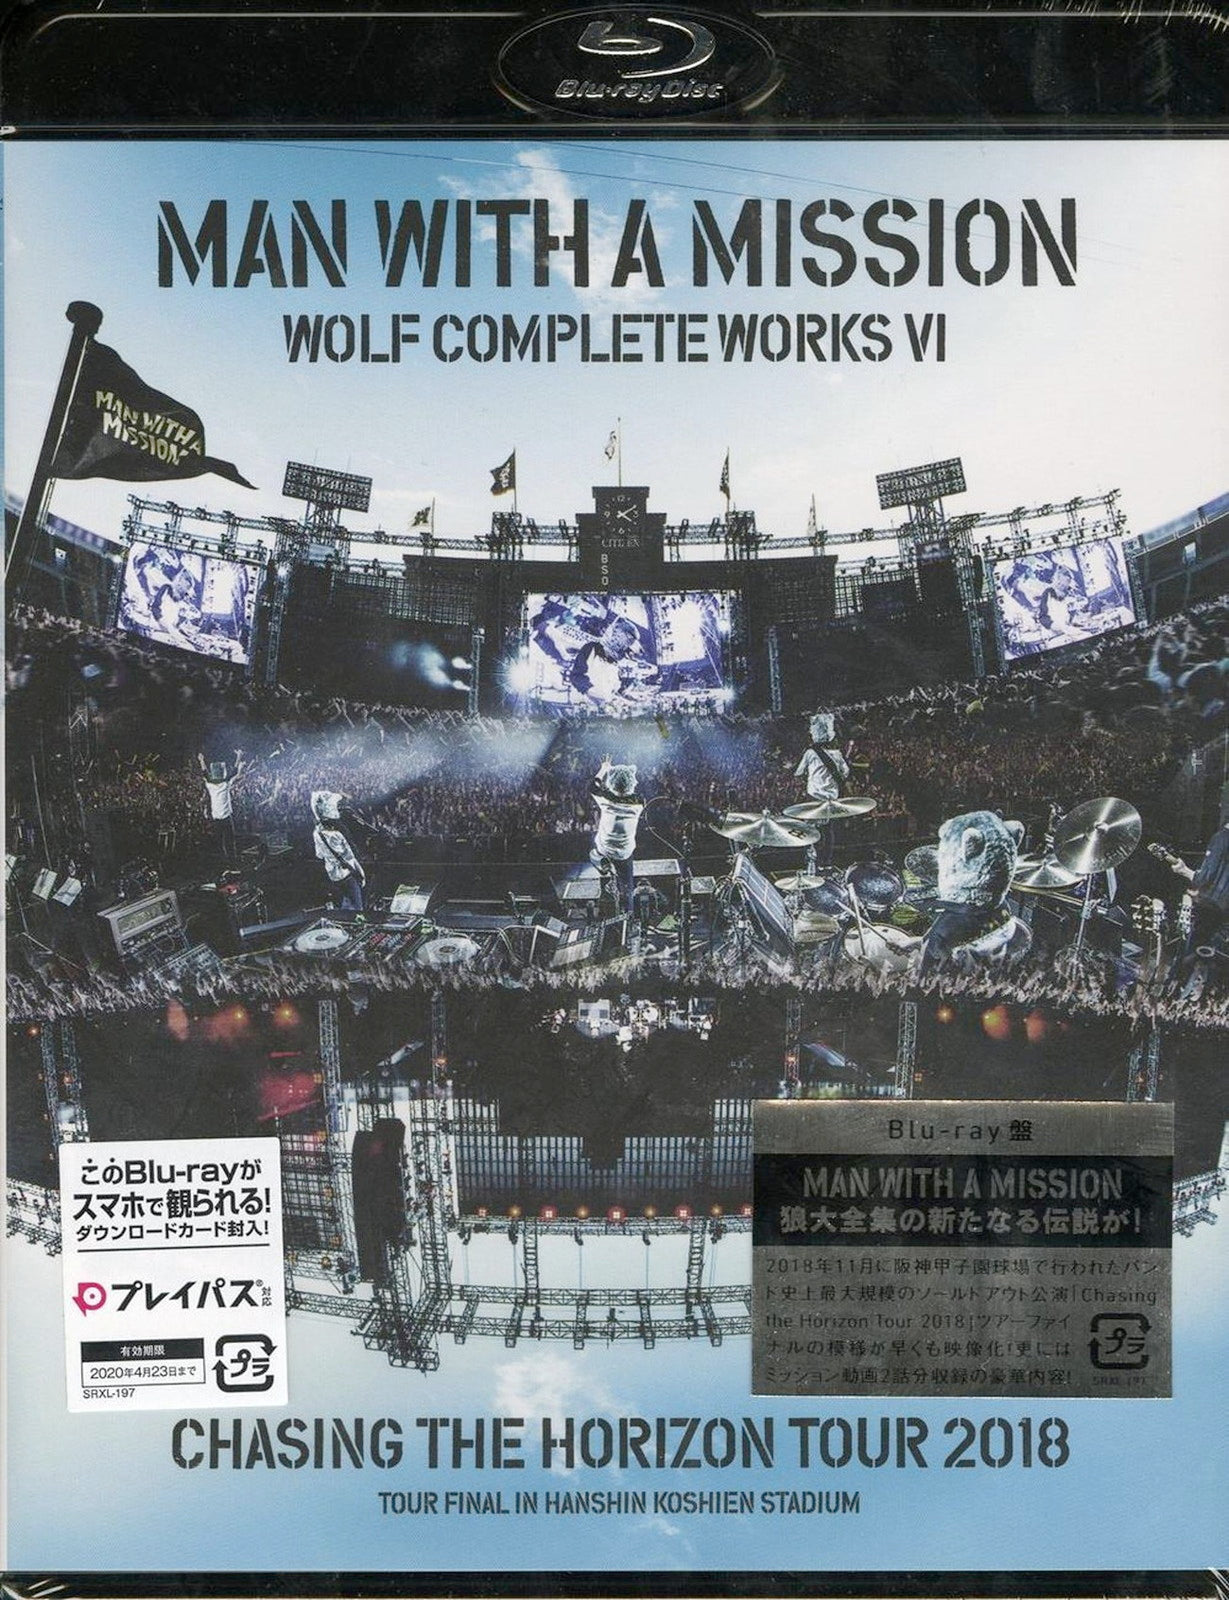 Man With A Mission - Wolf Complete Works Vi -Chasing The Horizon